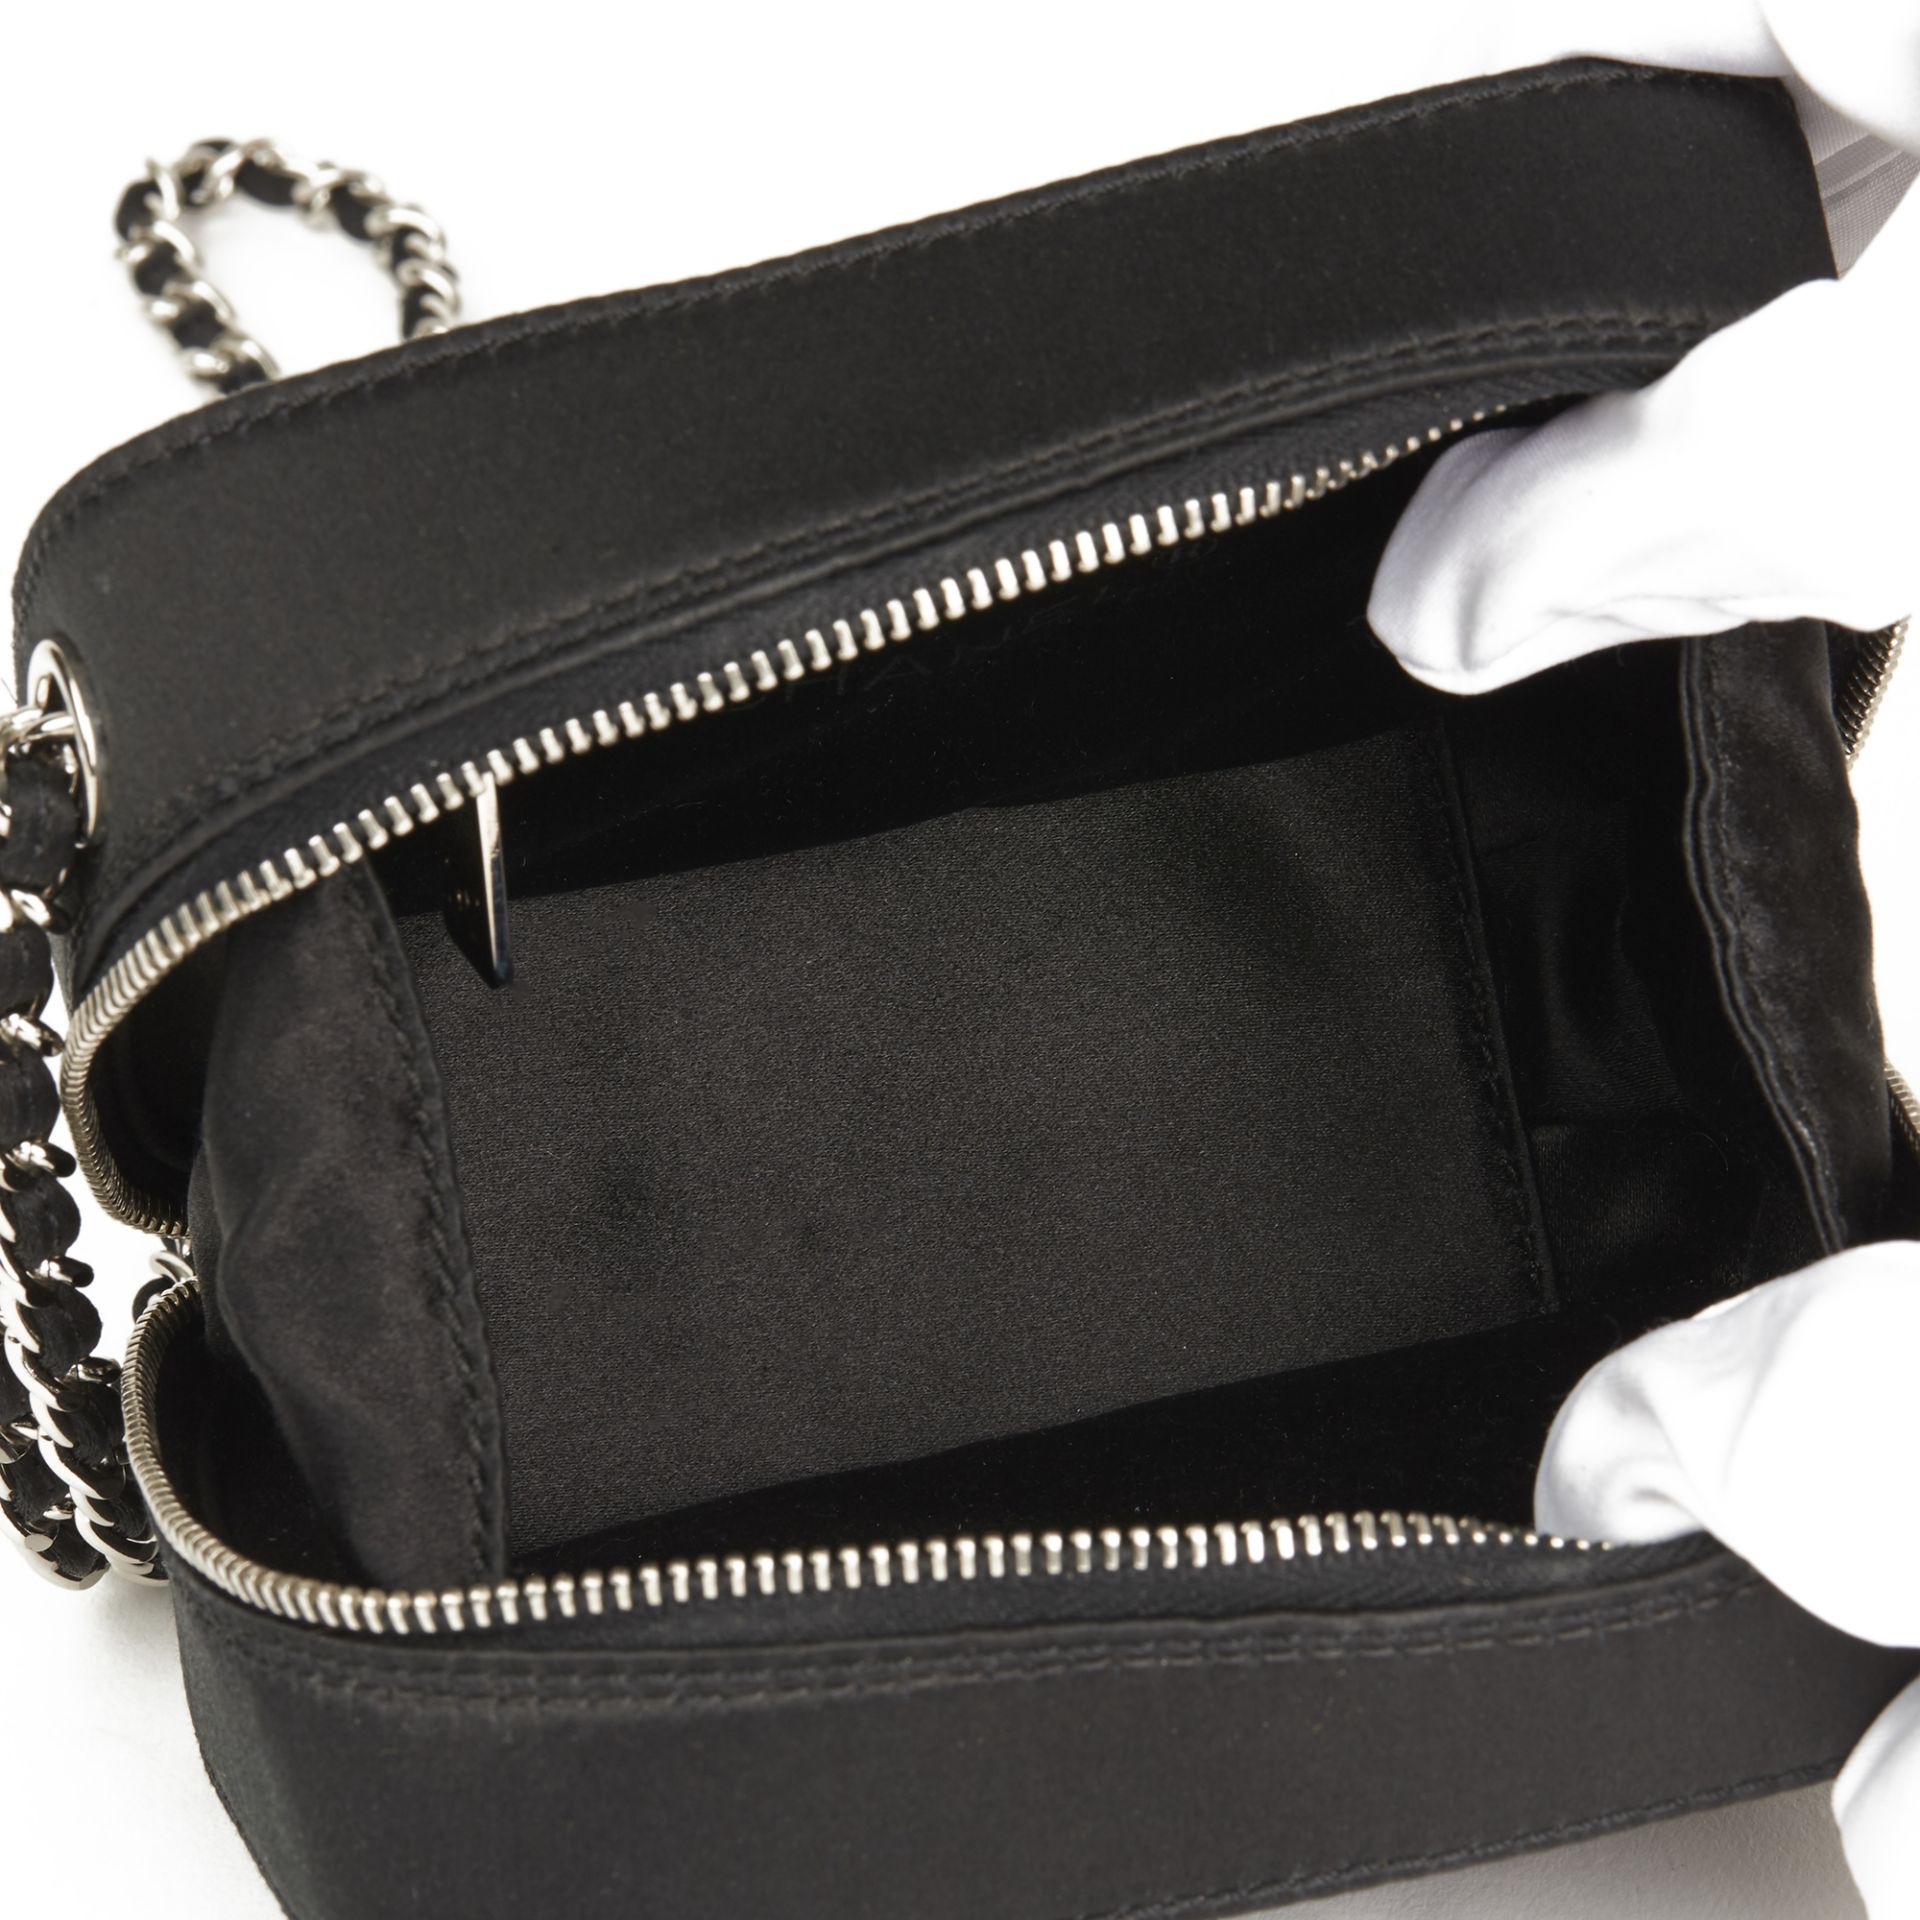 Chanel Black Quilted Satin Mini Timeless Wristlet - Image 3 of 9